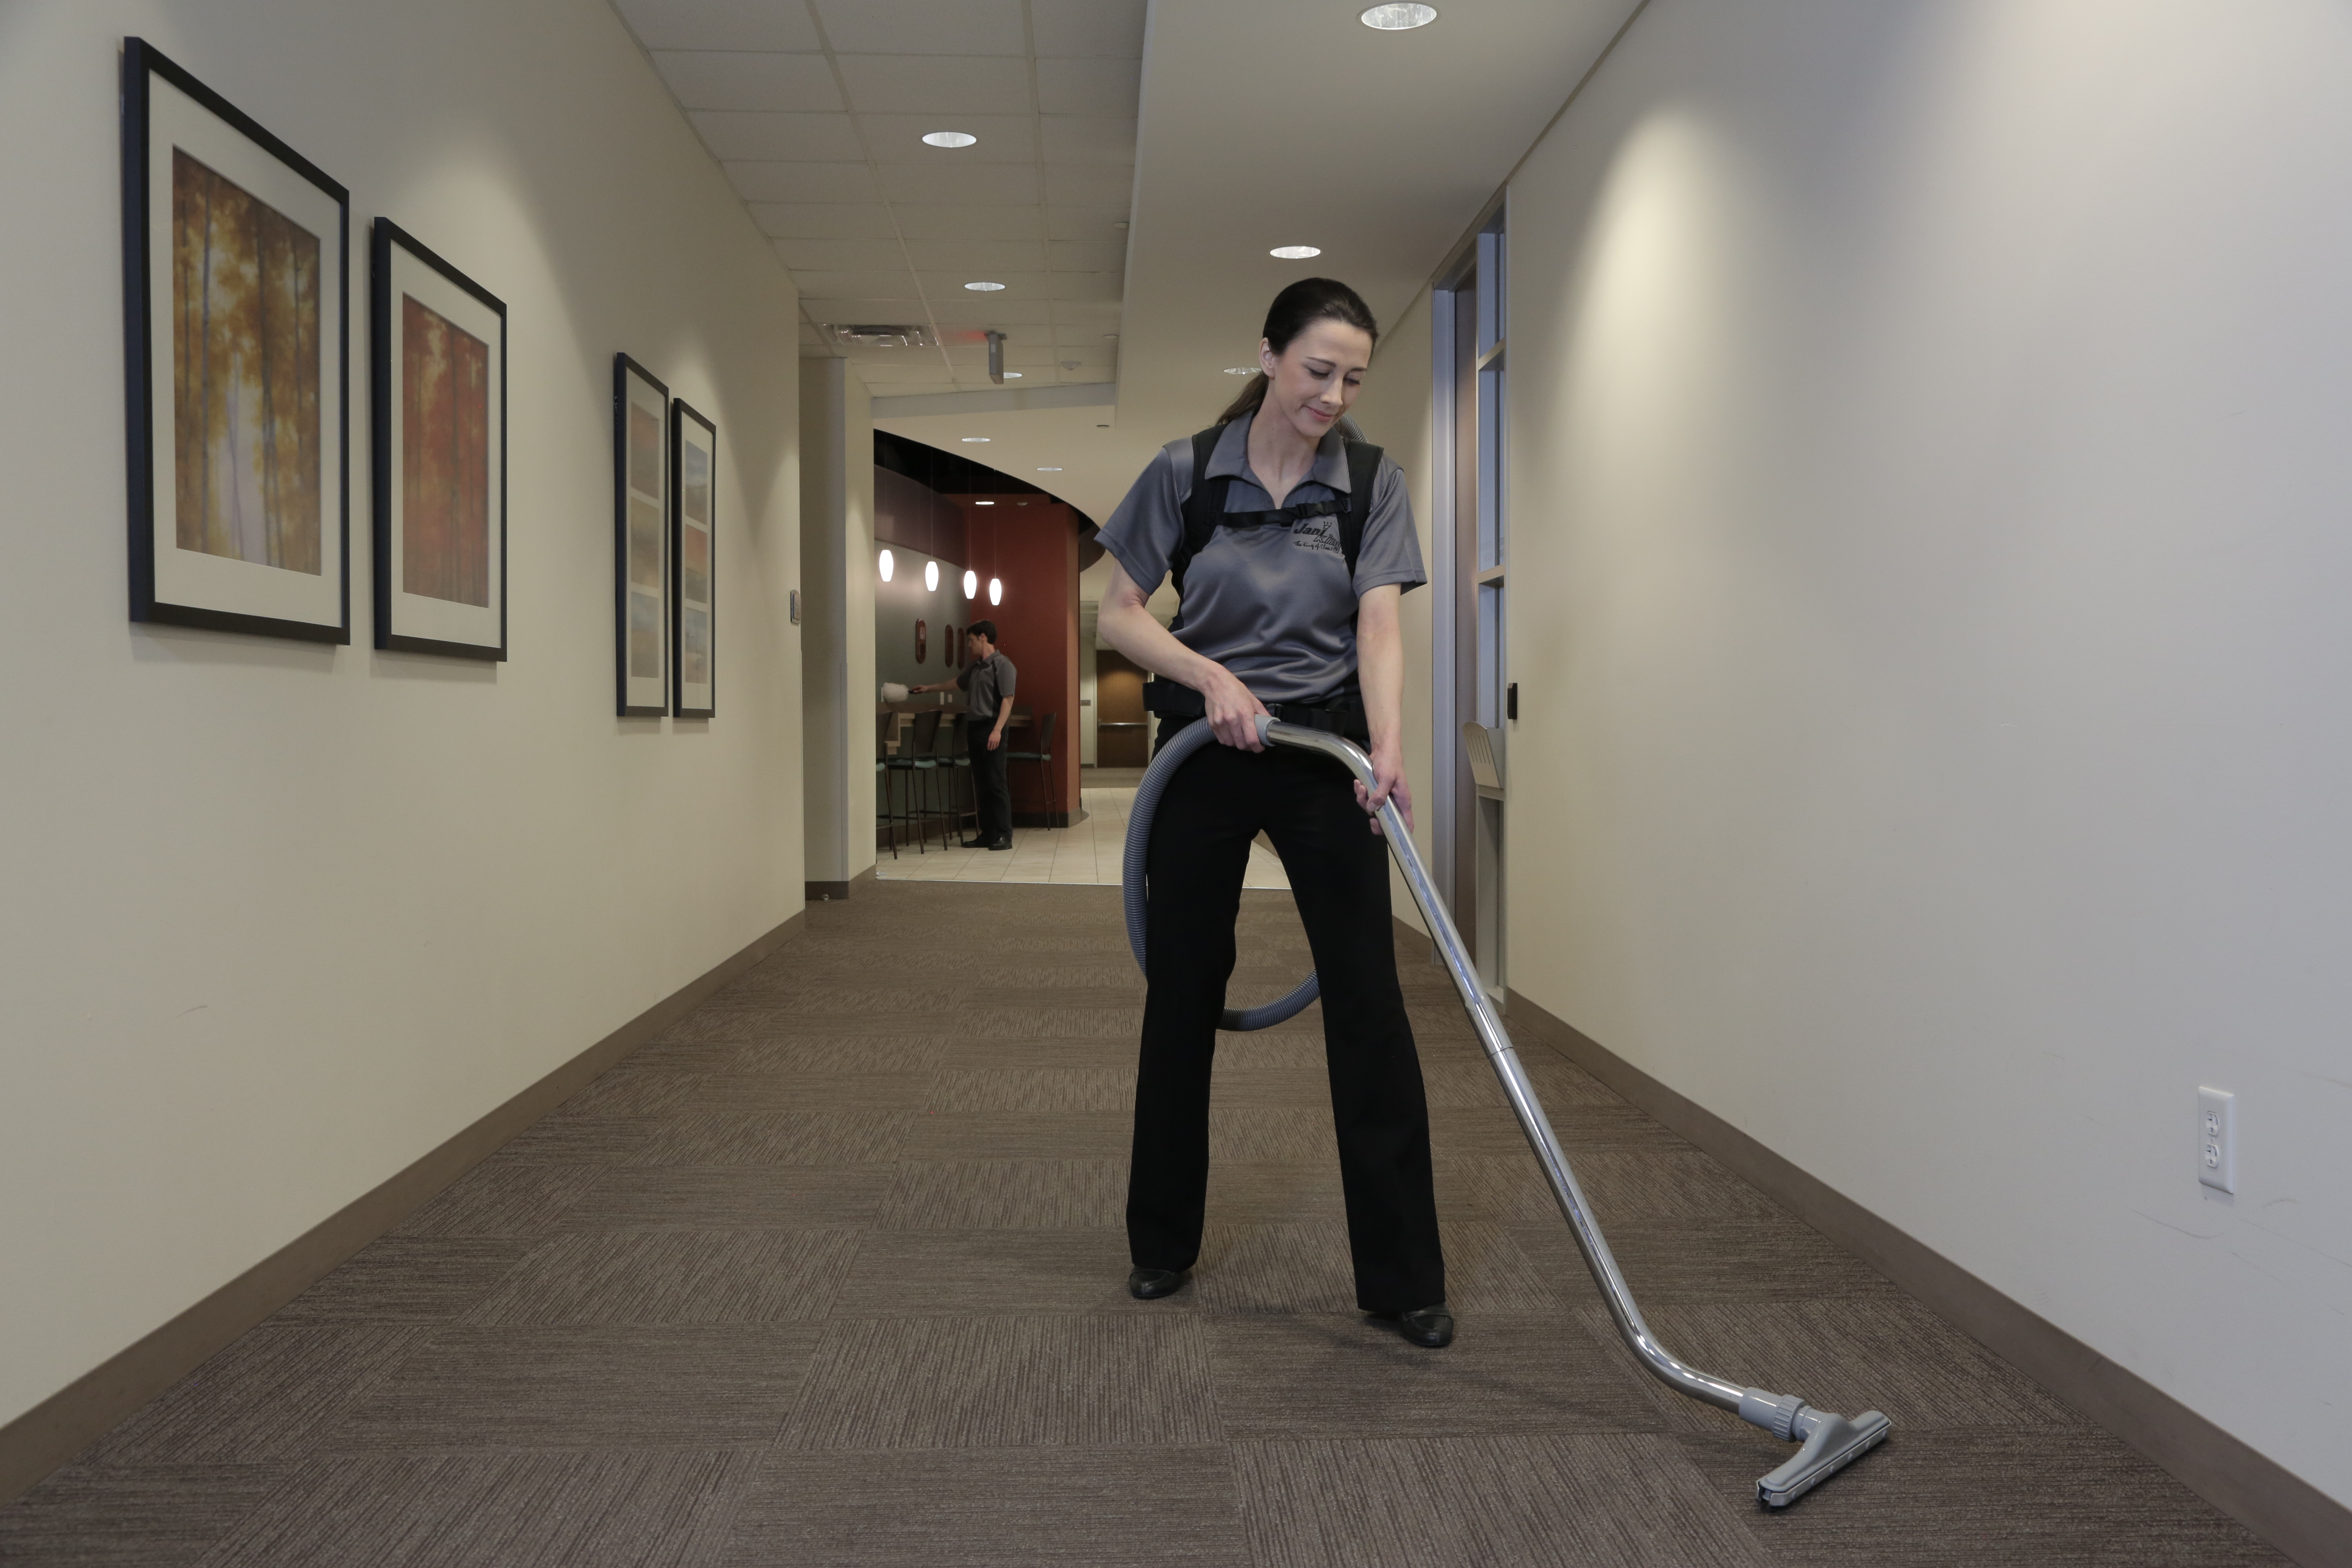 Jani-King commercialc cleaning woman vacuuming carpet in hallway